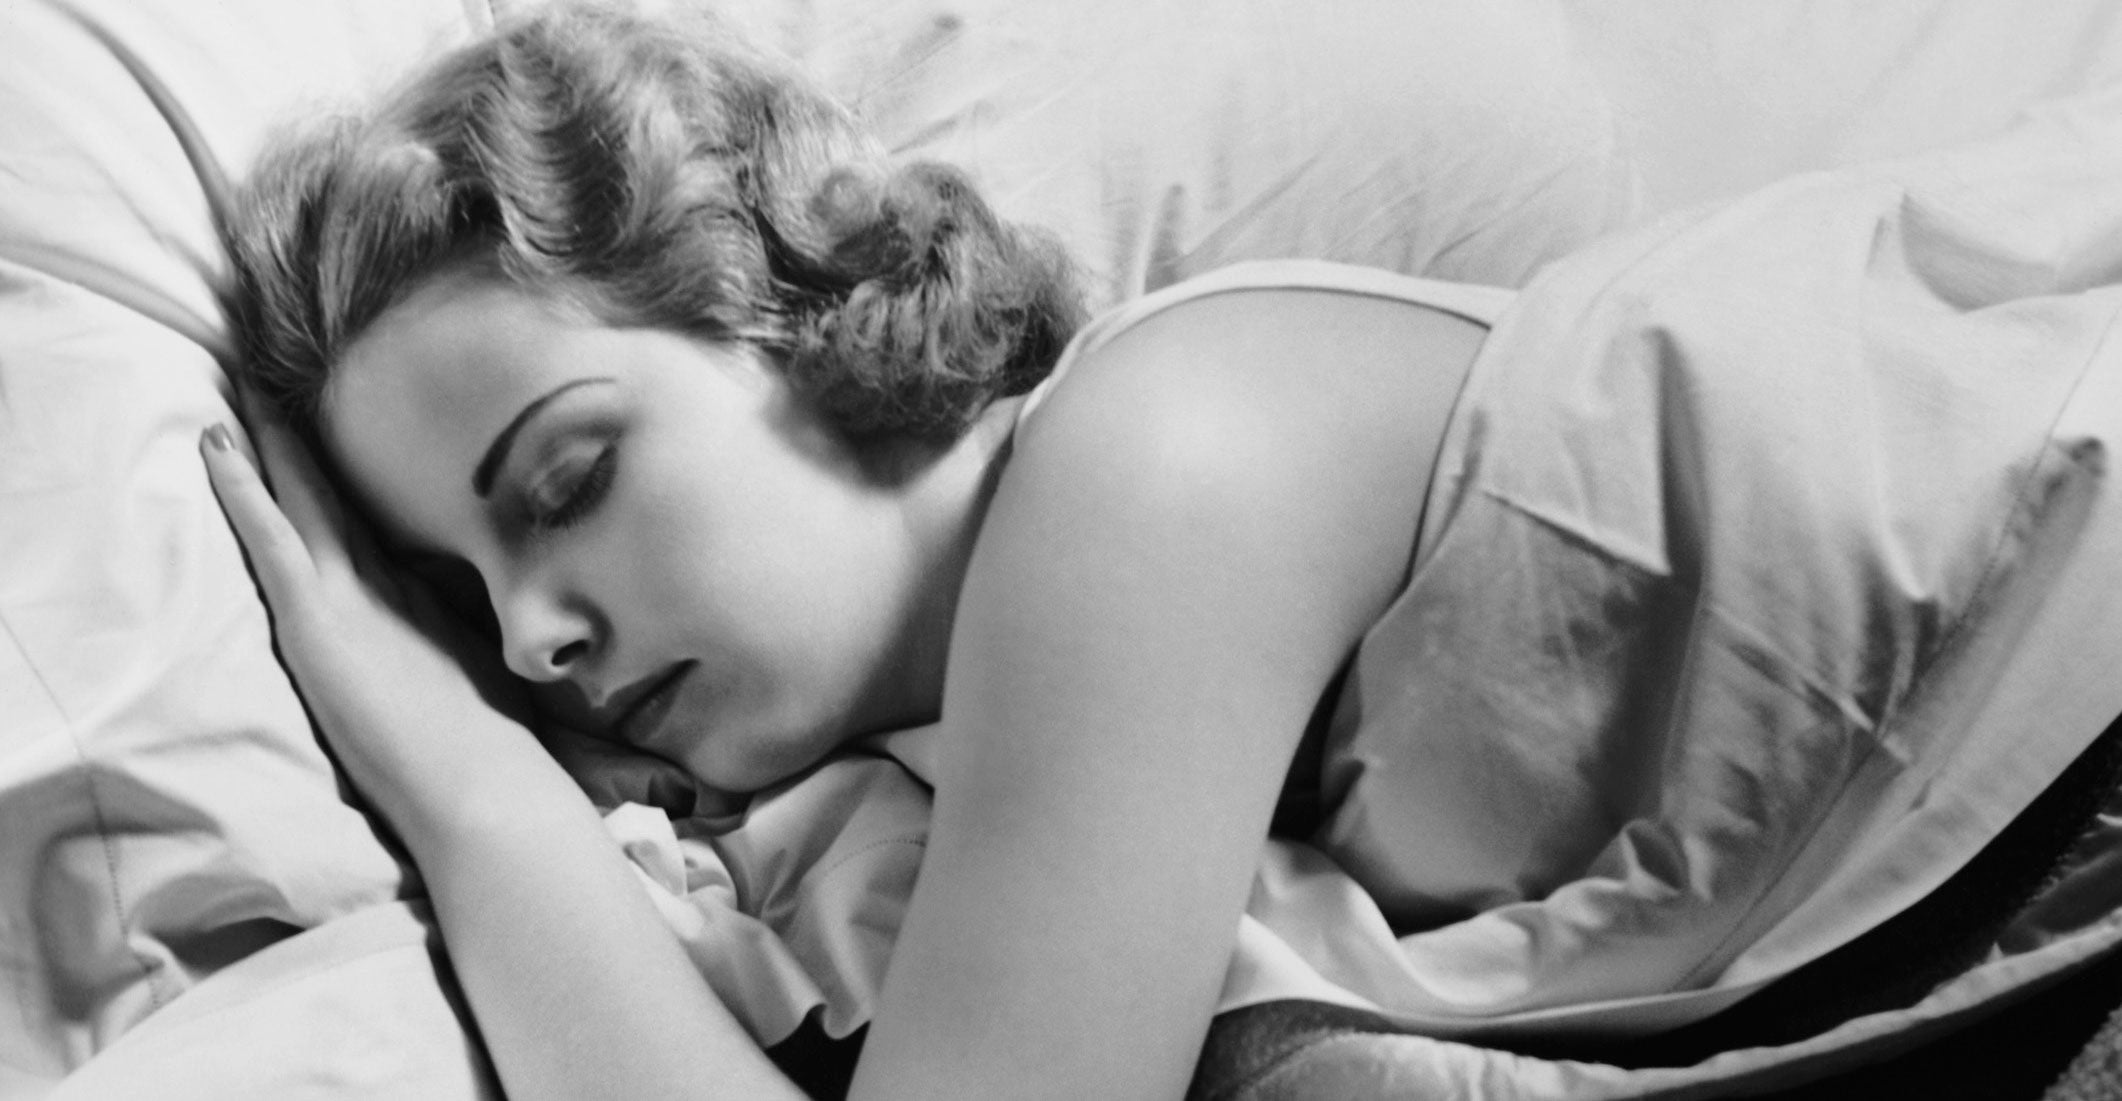 Depriving oneself of sleep could prevent people from experiencing flashbacks of traumatic memories